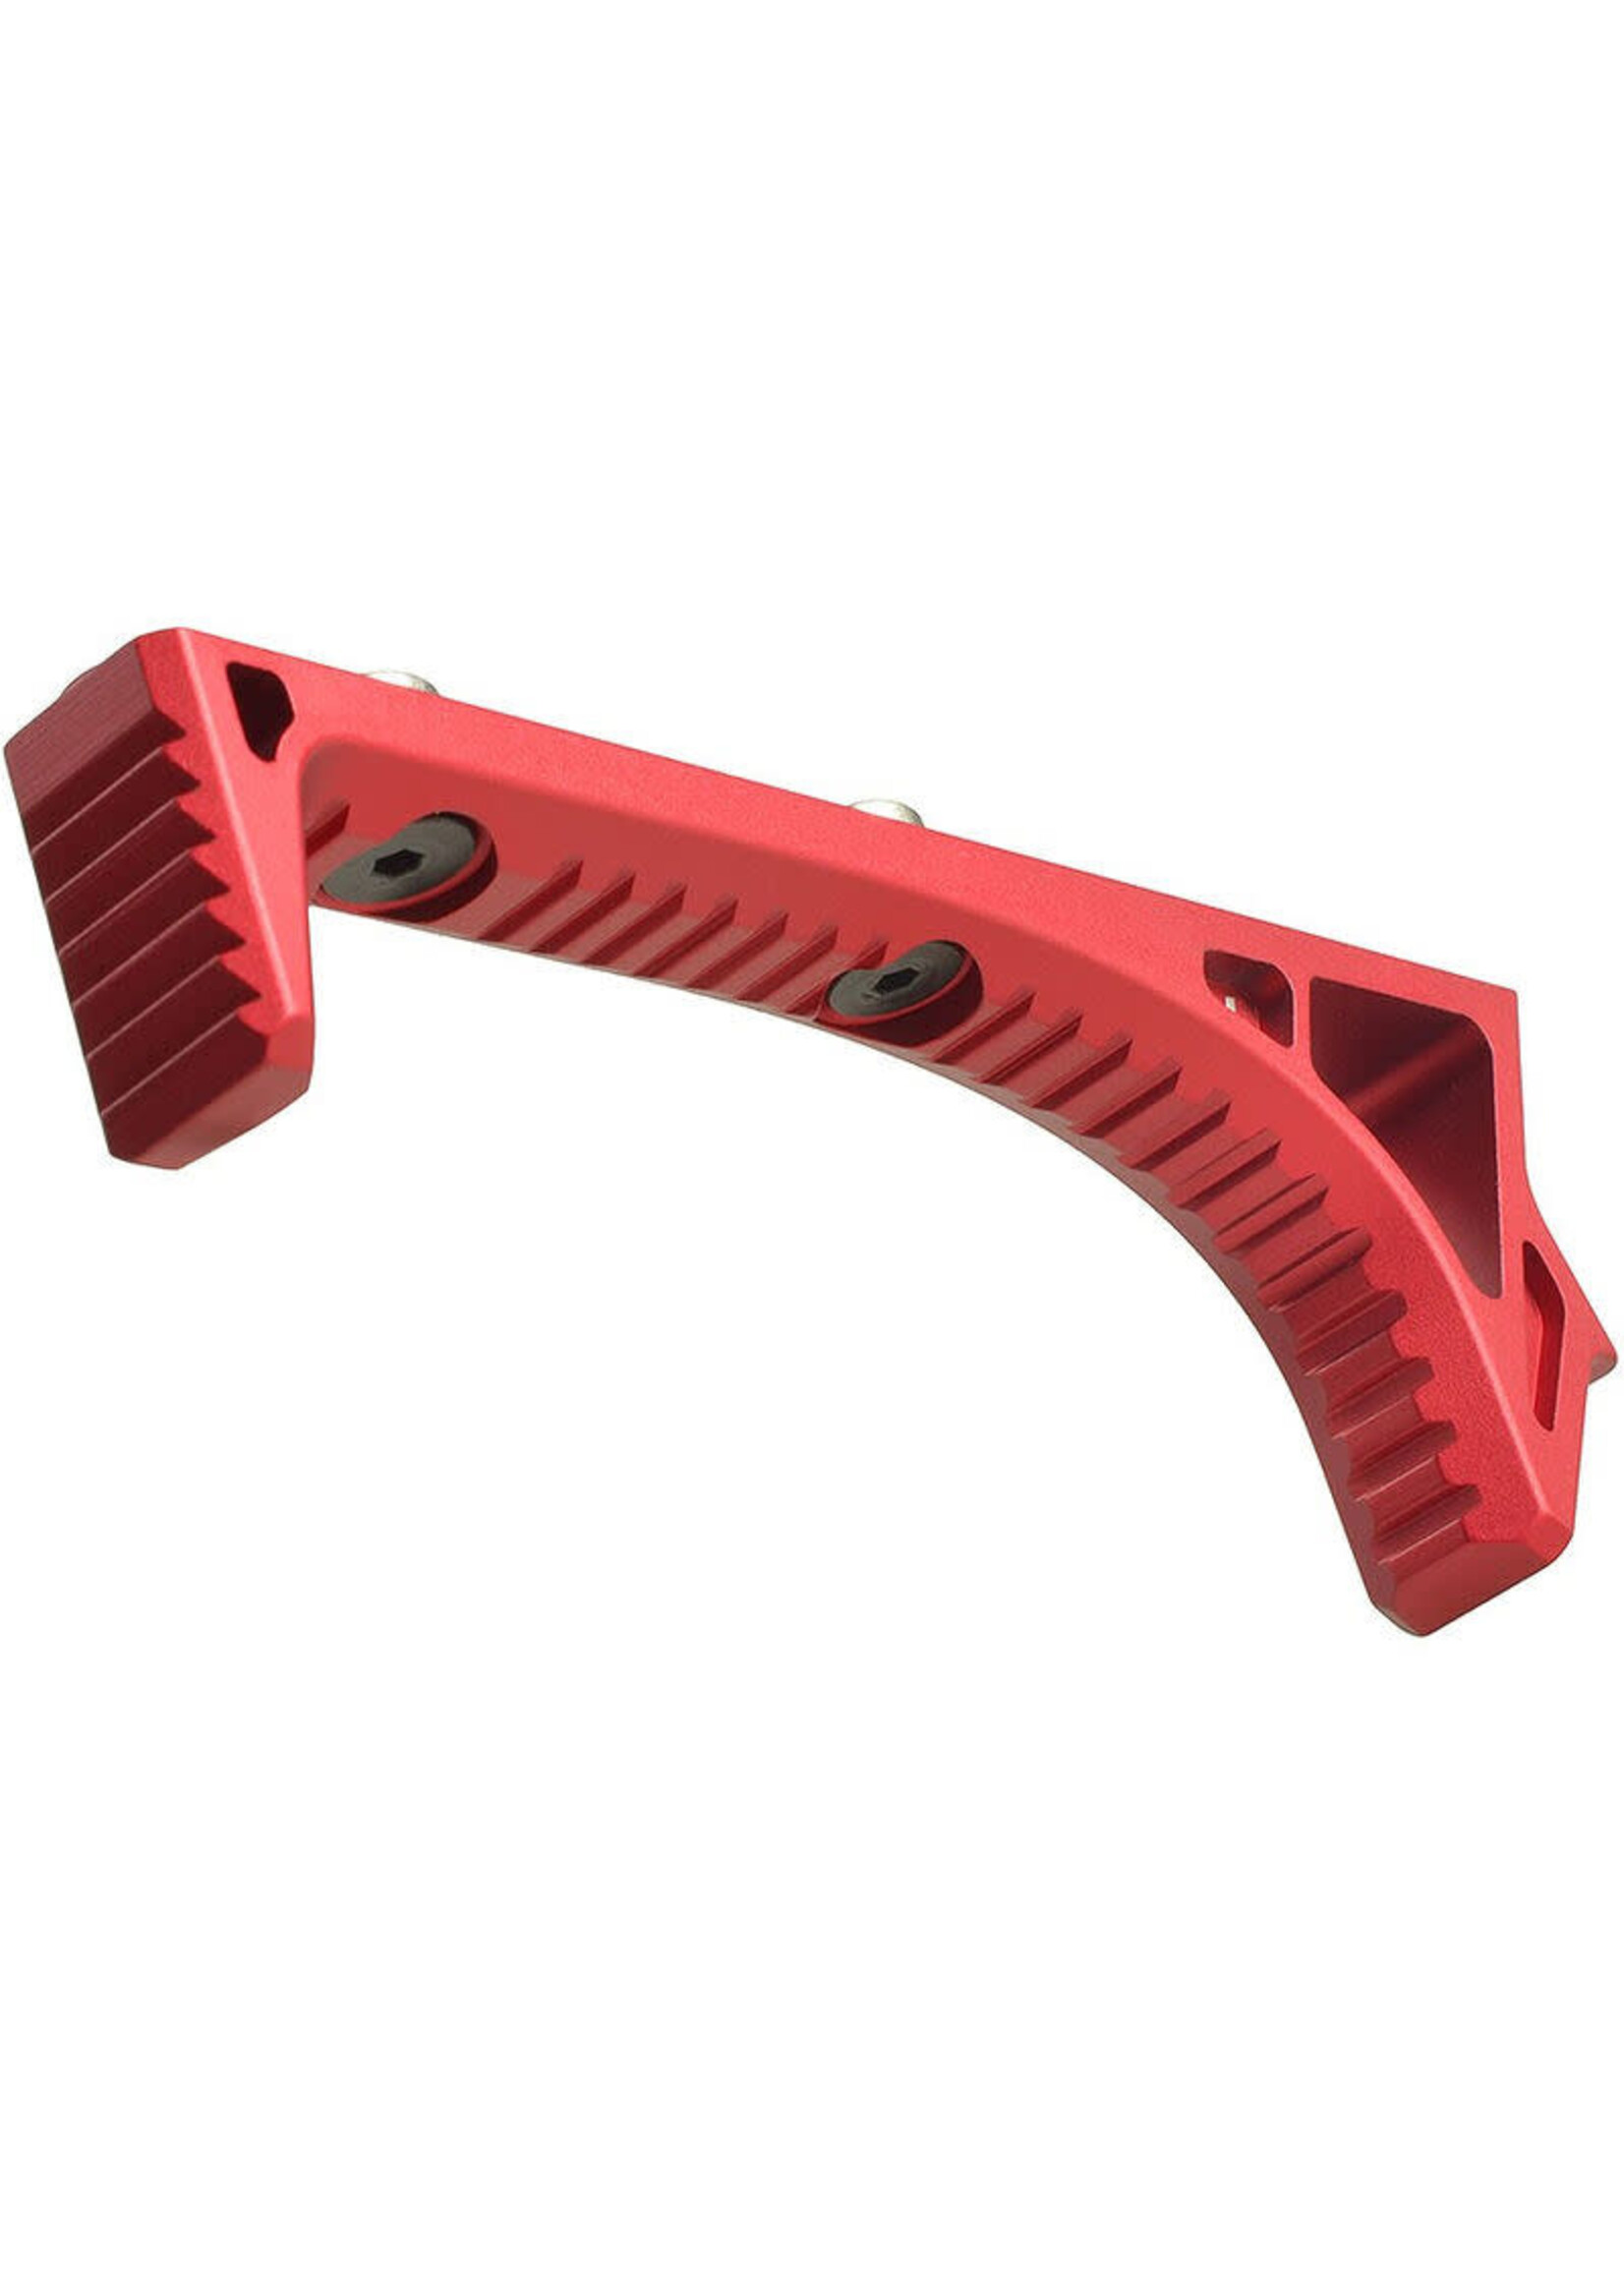 STRIKE INDUSTRIES LINK CURVED TACTICAL FOREGRIP FOR MLOK/KEYMOD RED